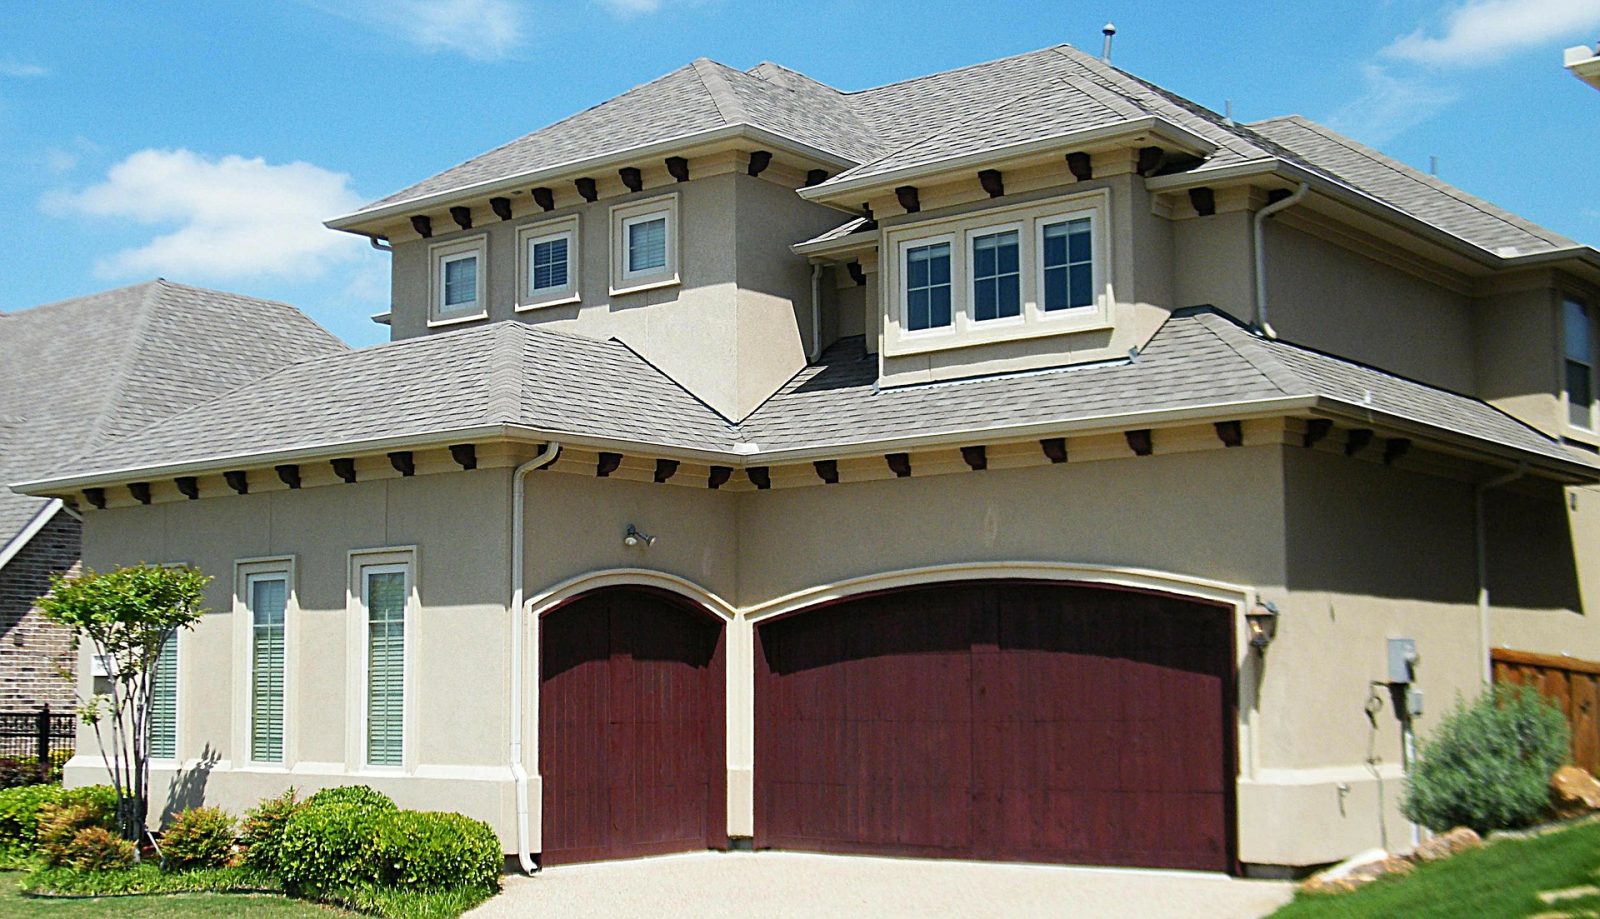 Go for Curb Appeal with a New Garage Door